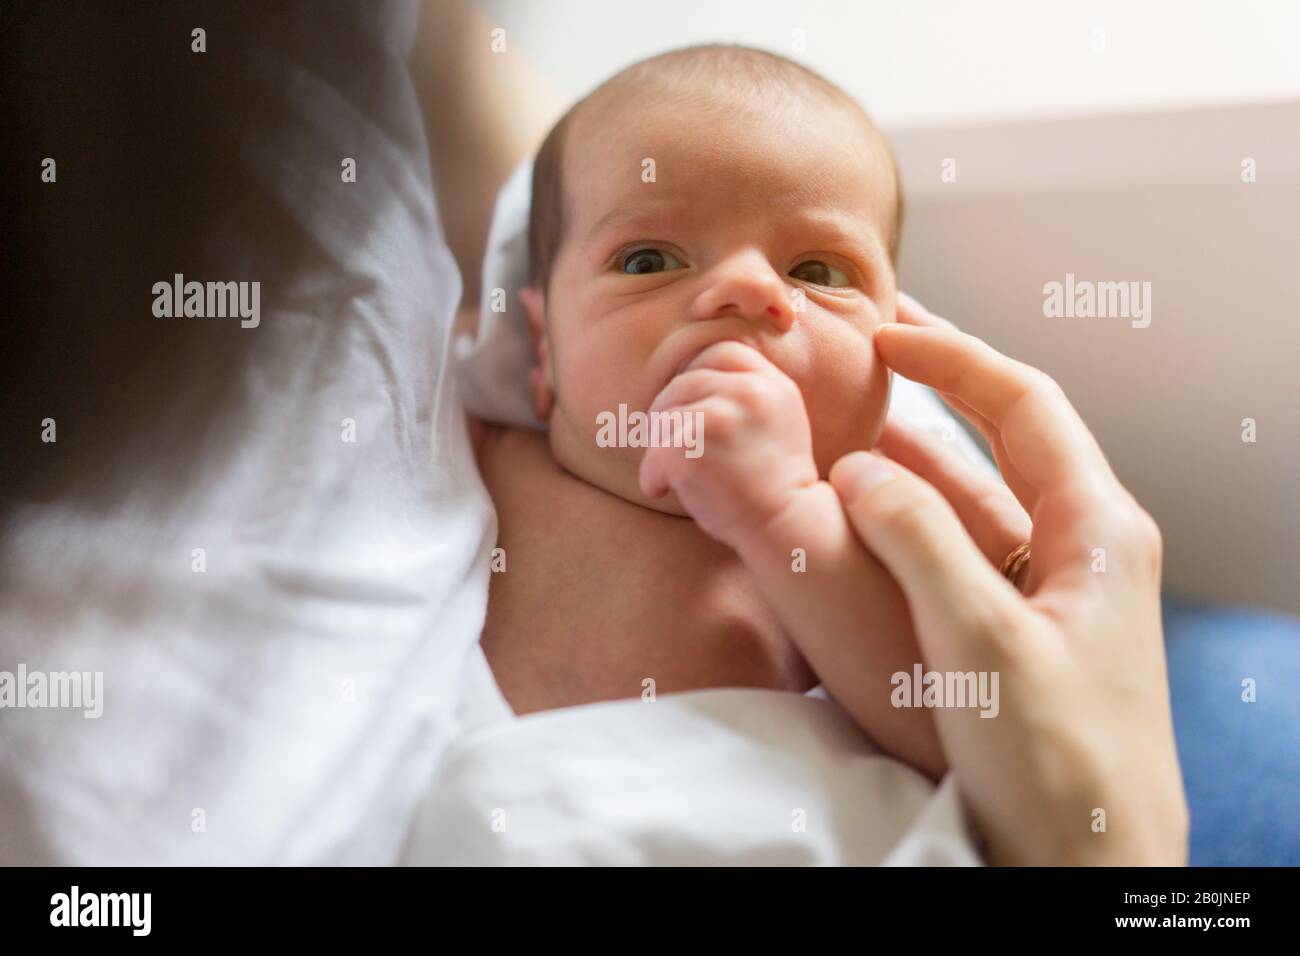 Little hand of a newborn in a large hand of mother. Stock Photo